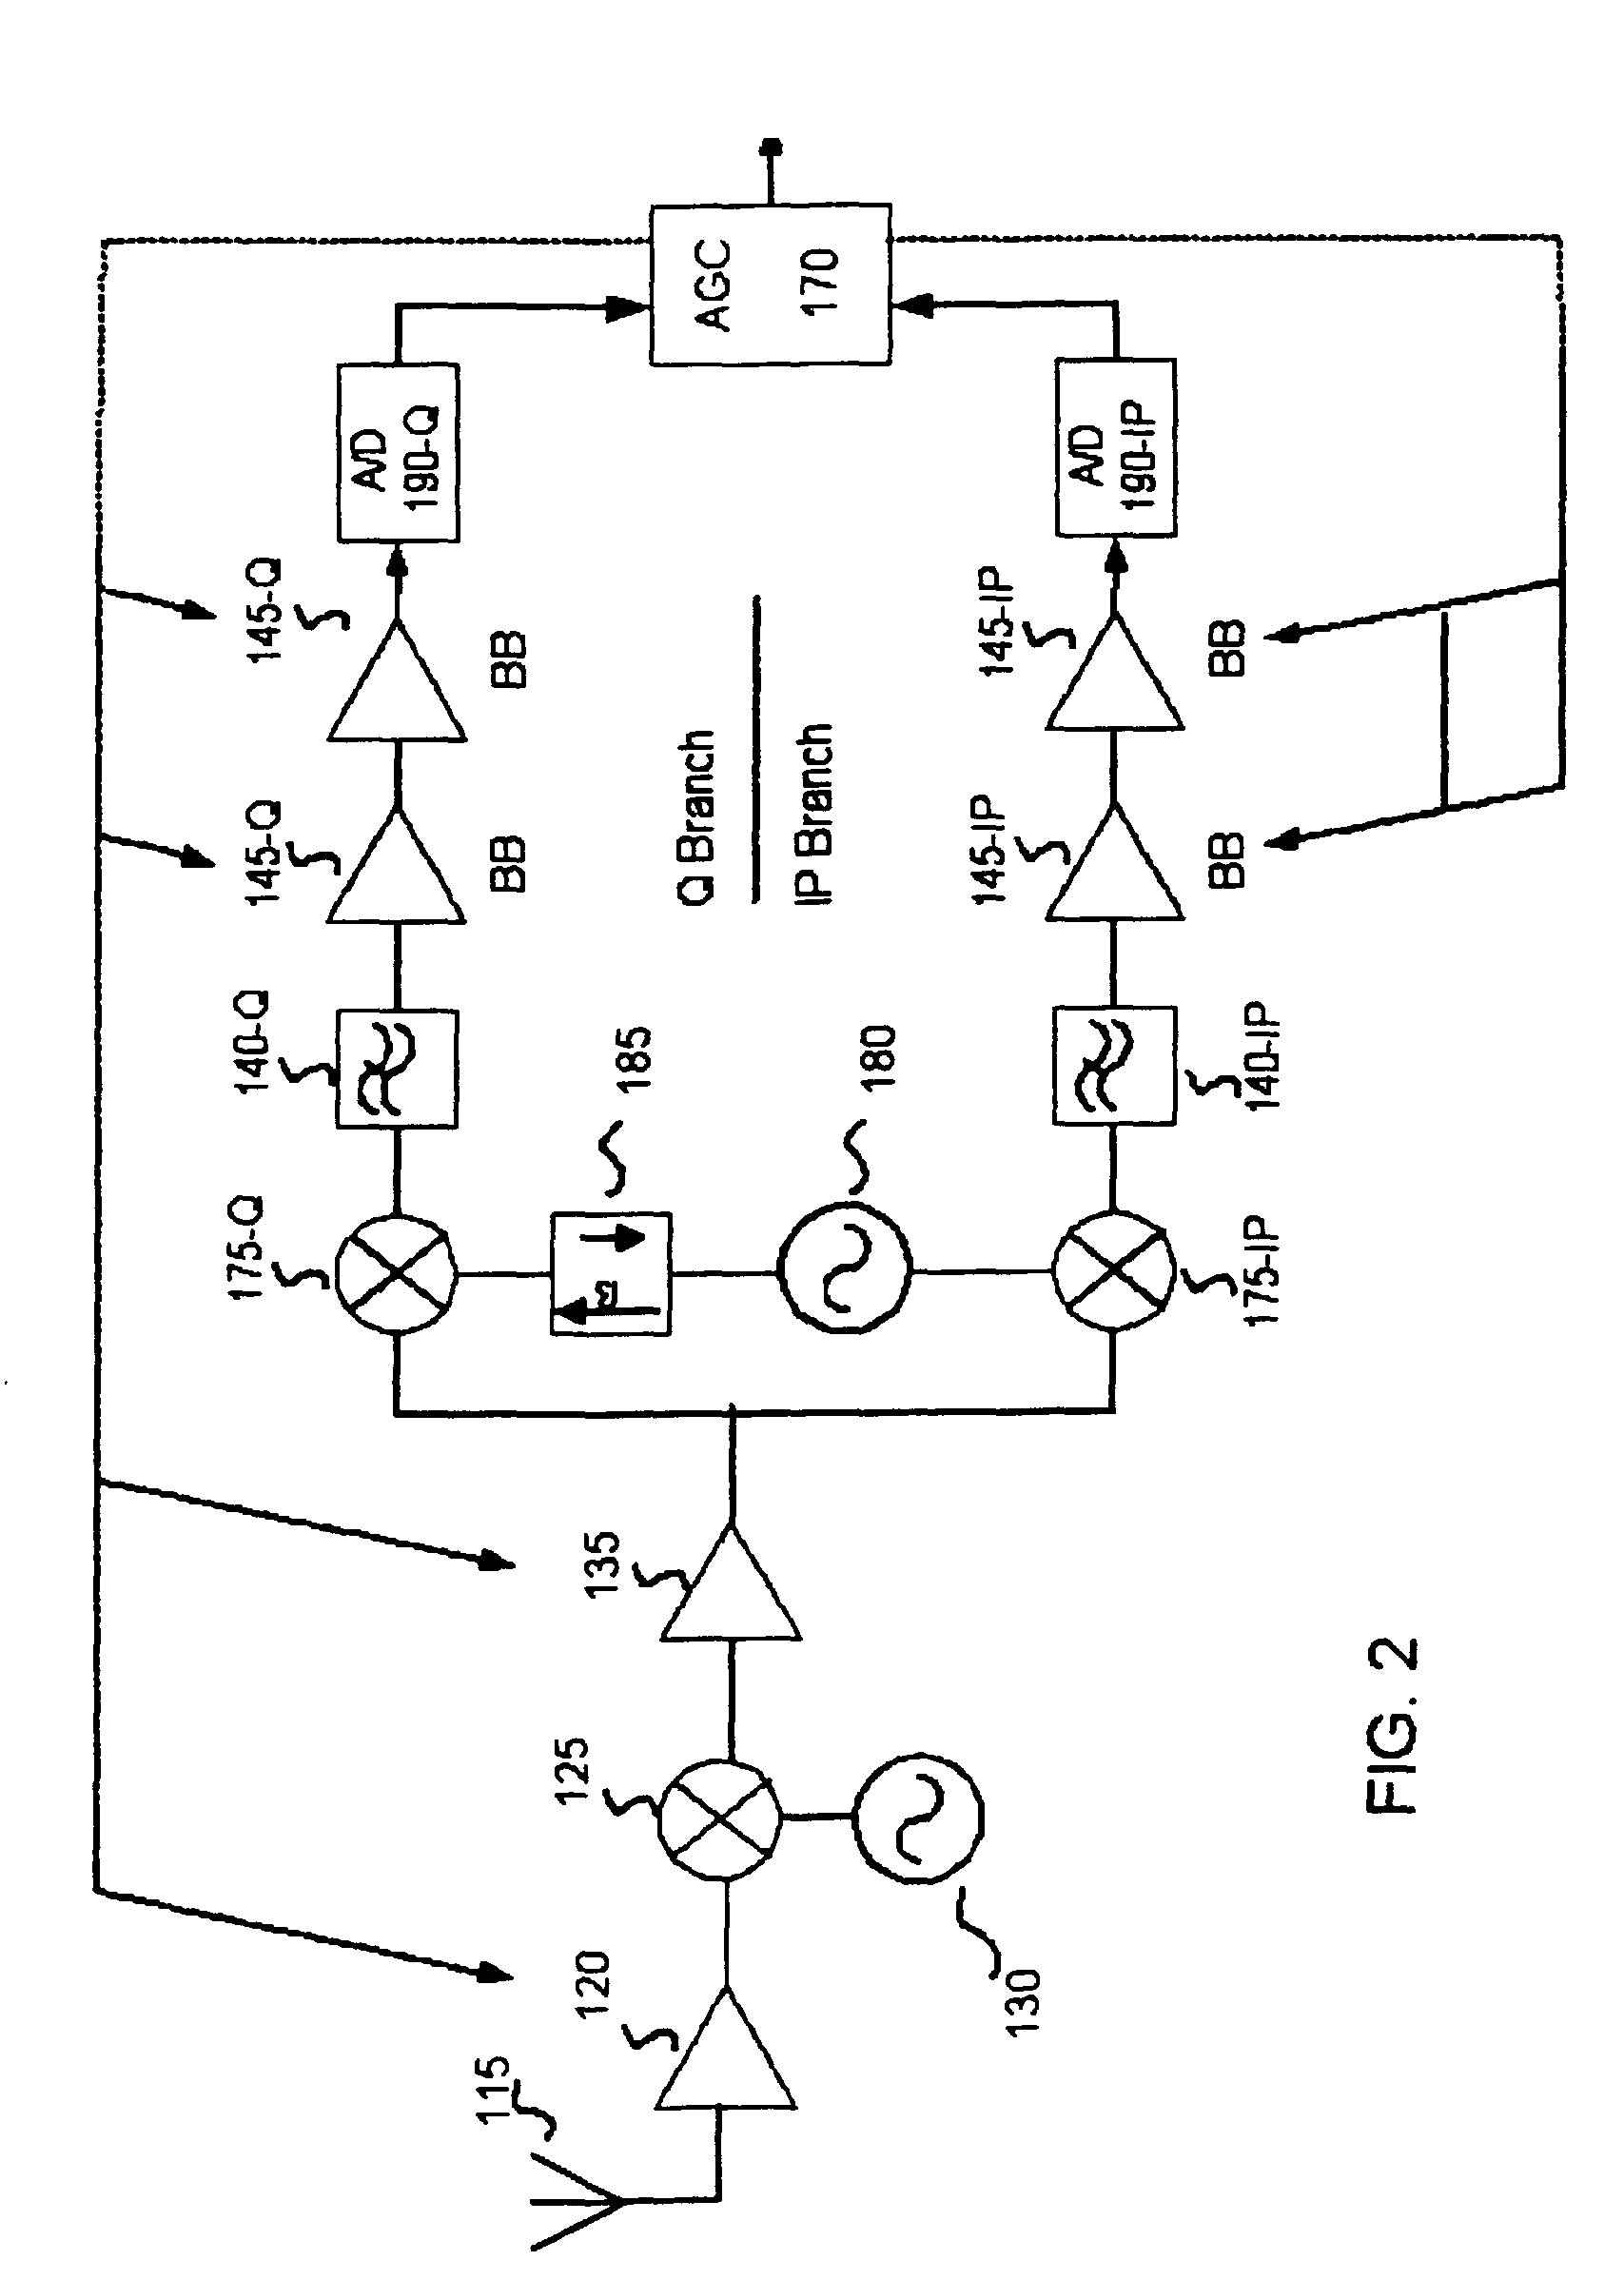 Method and system for noise floor calibration and receive signal strength detection